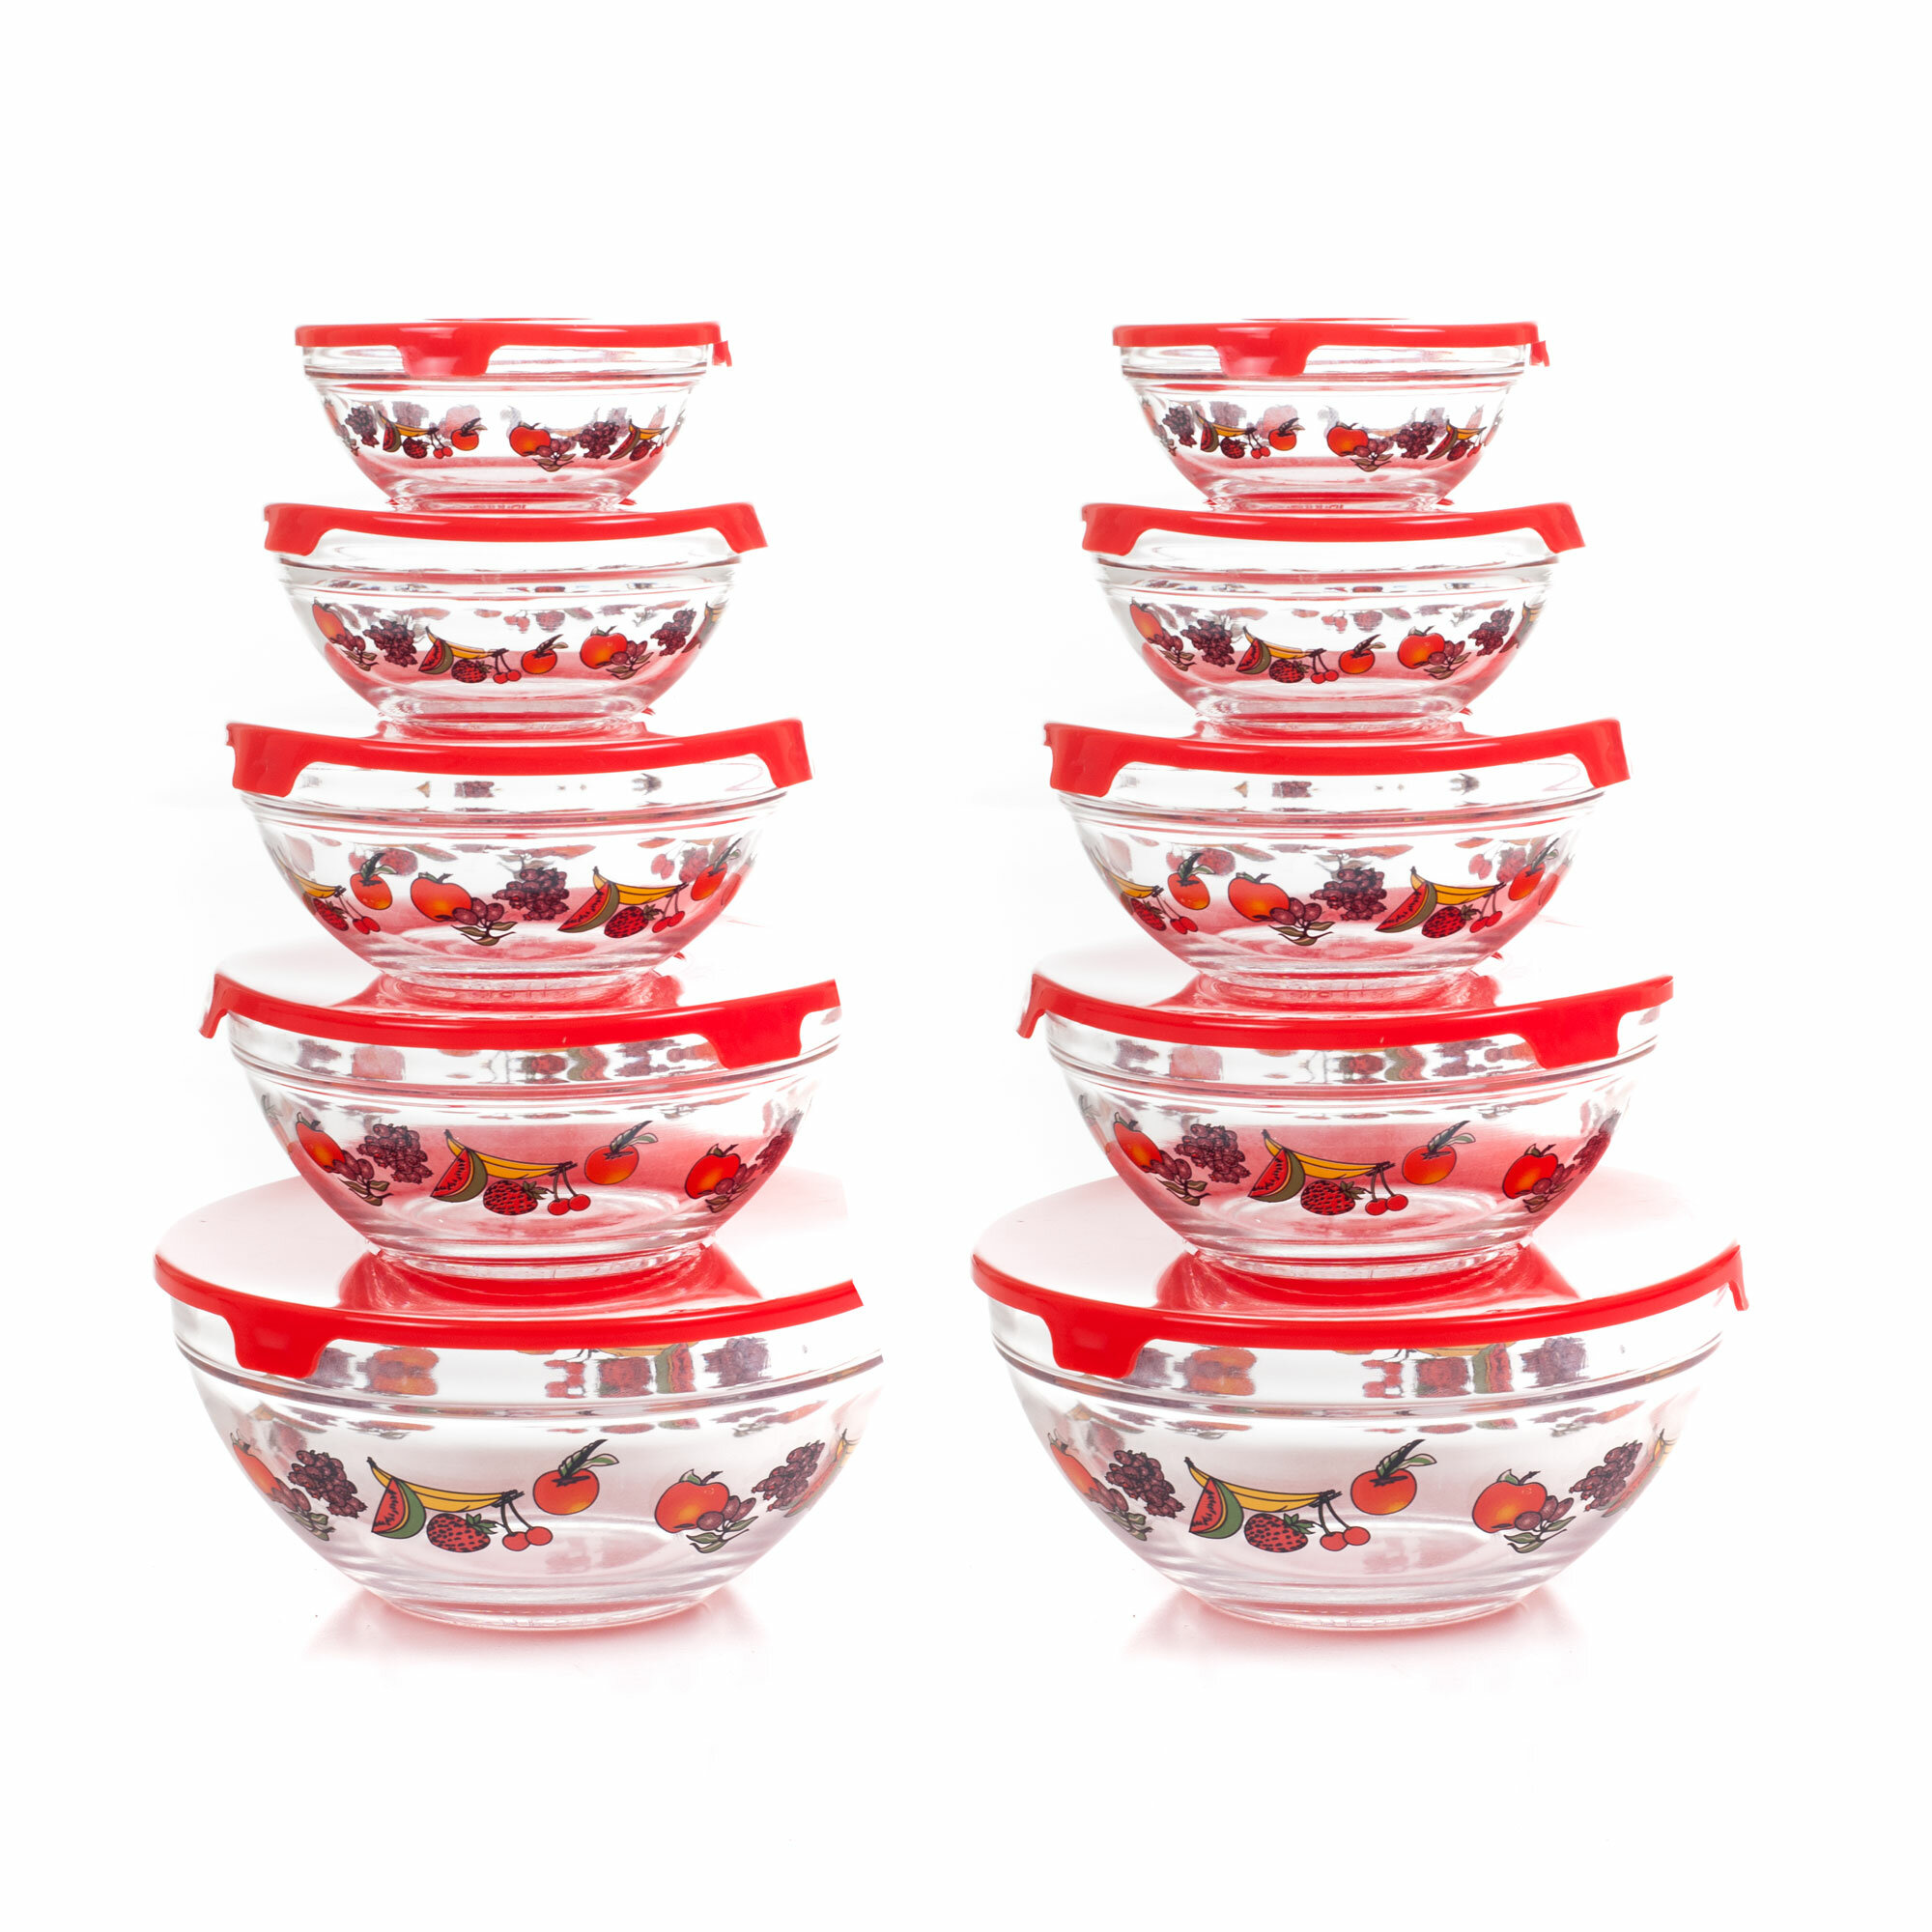 Chef Buddy 20-Piece Glass Storage Bowls with Lids Set - with Meal Prep, and  Mixing & Reviews